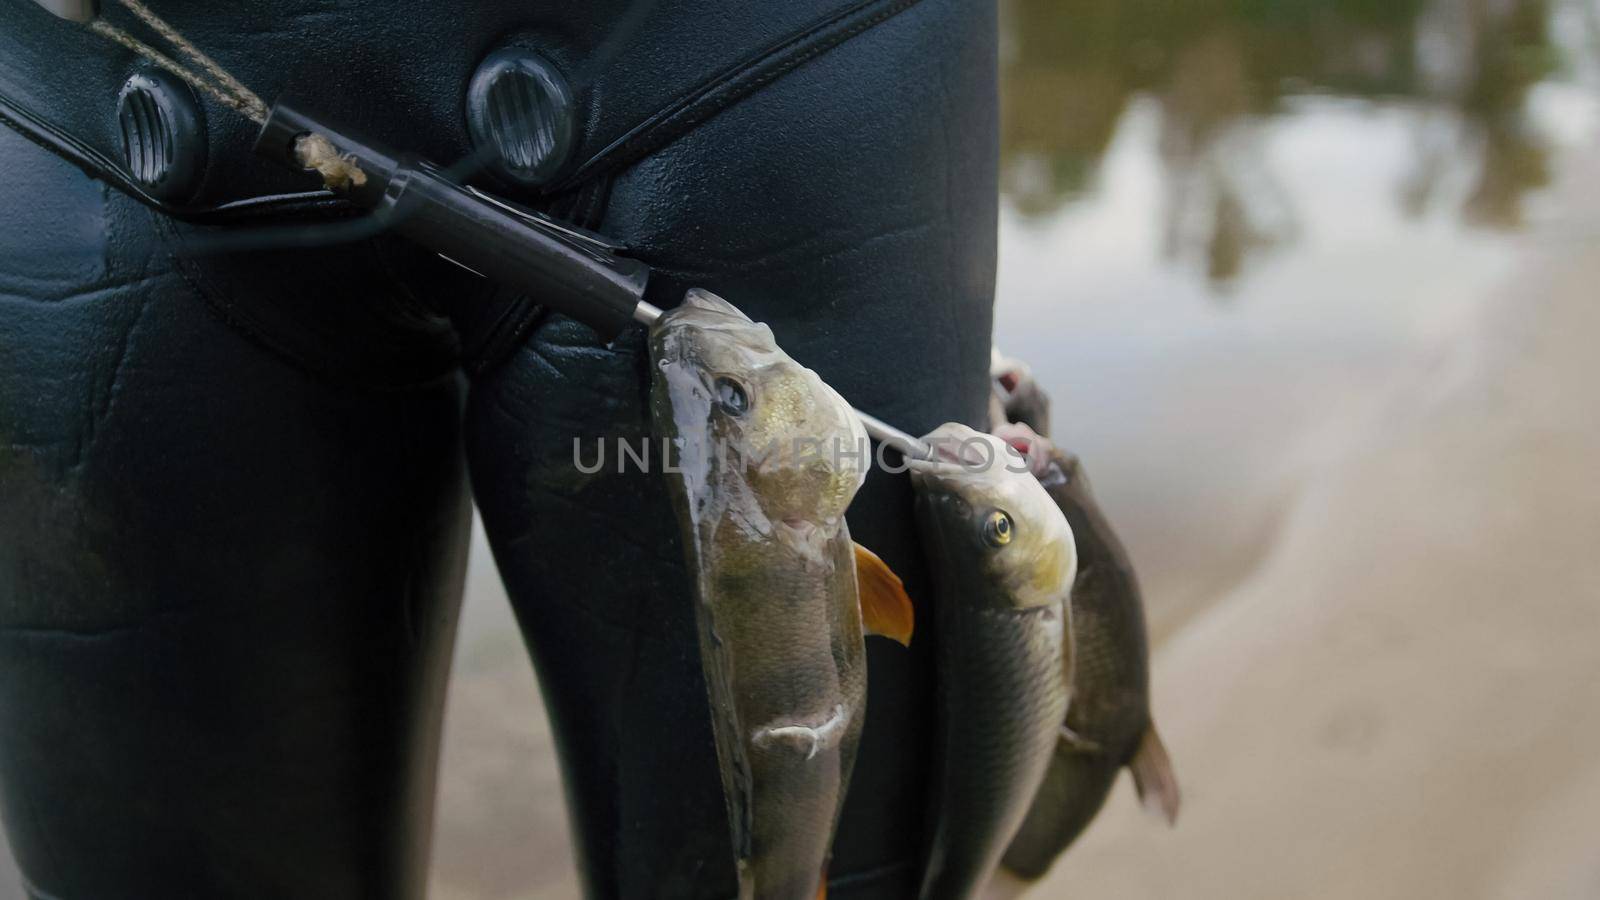 Spear fisherman shows Freshwater Fish on the belt of underwater after hunting in forest river by Studia72